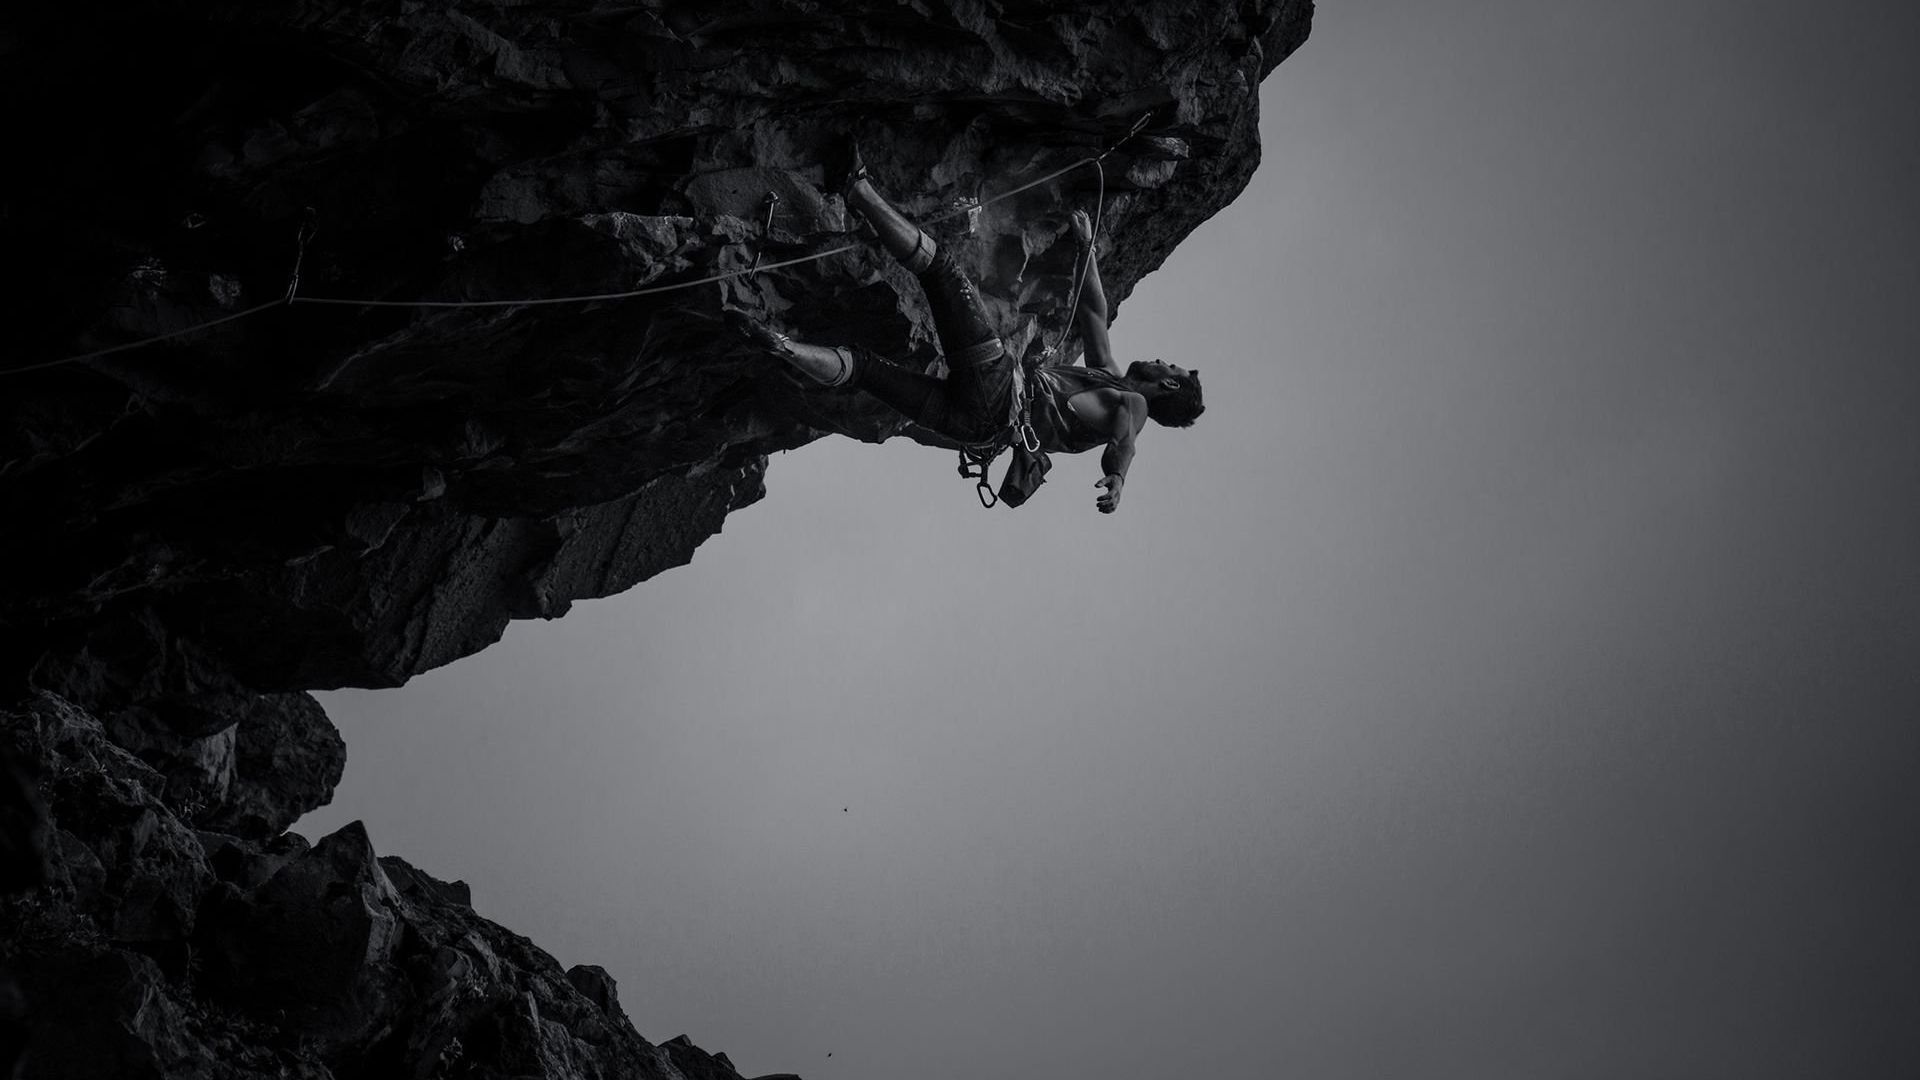 100 Rock Climbing Pictures  Download Free Images on Unsplash